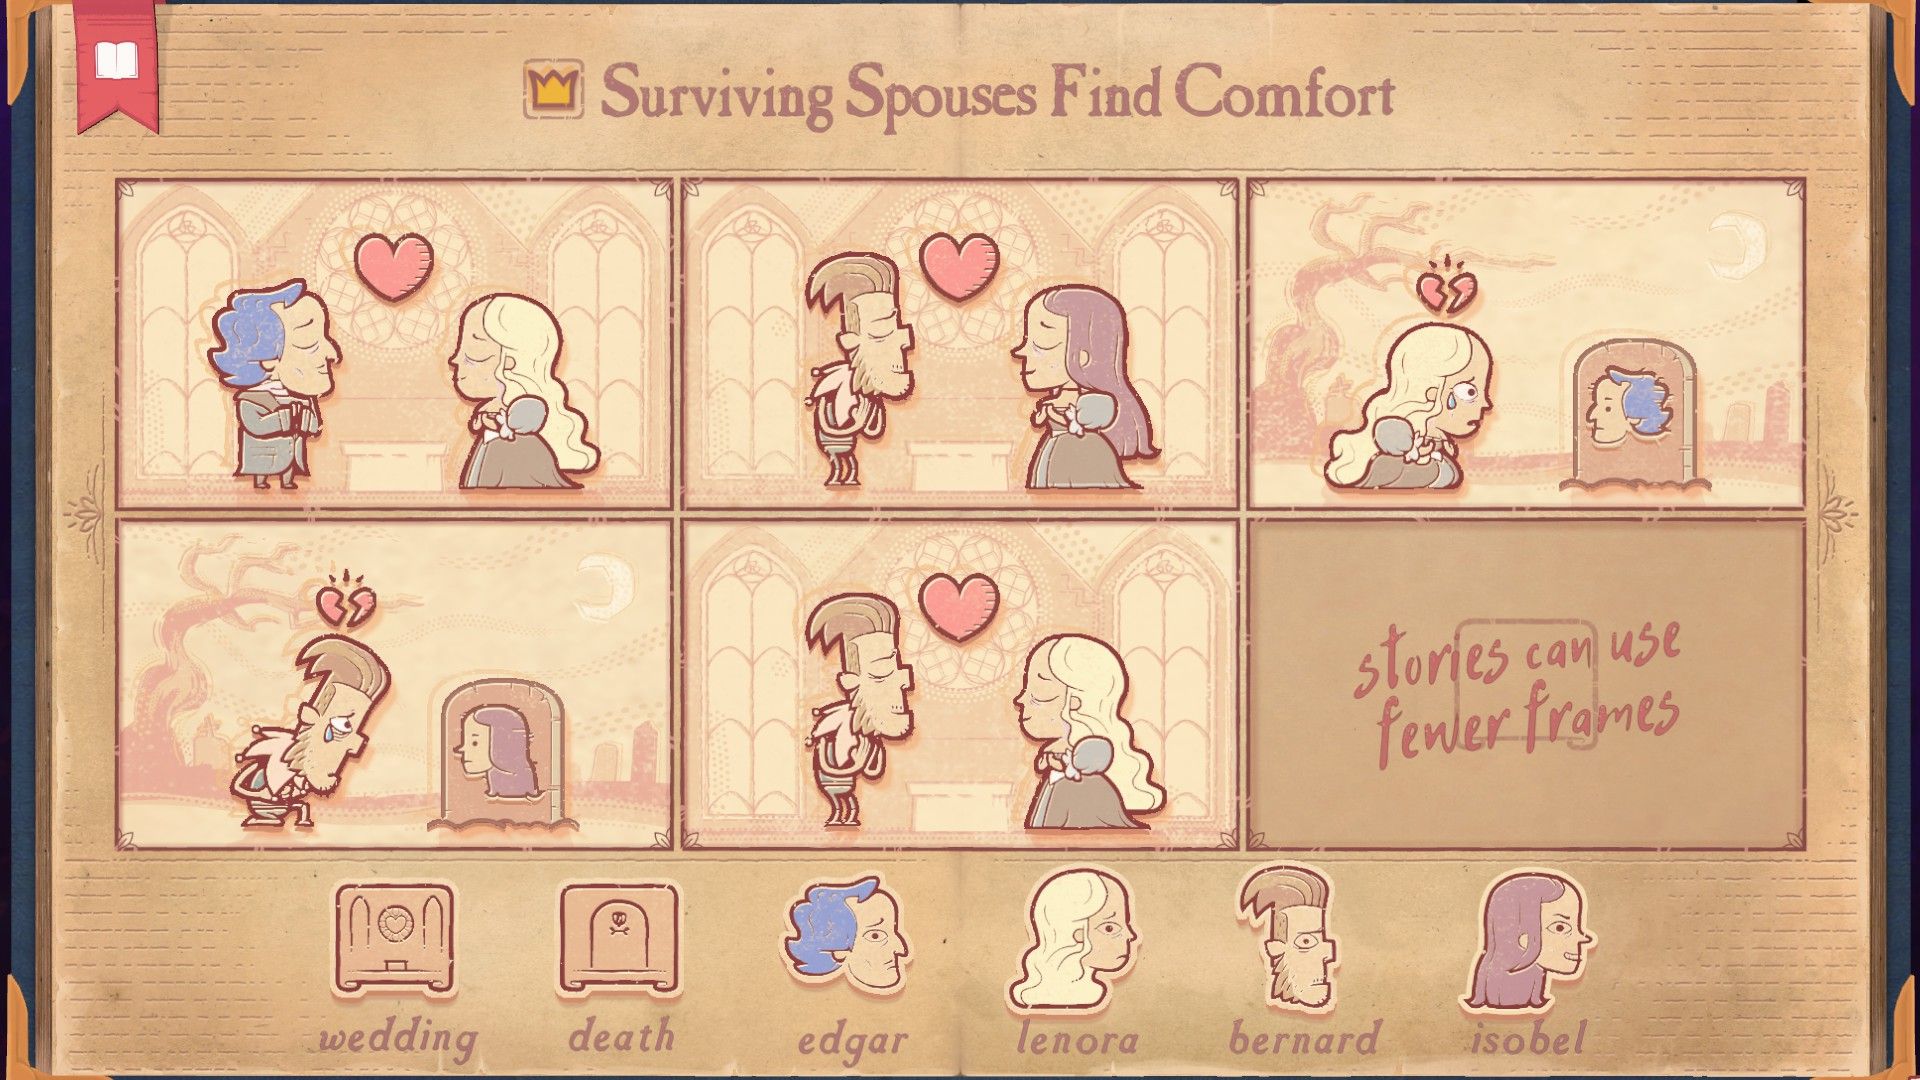 The solution for the Grief section of Stoyteller, showing a surviving spouse remarrying and finding comfort.